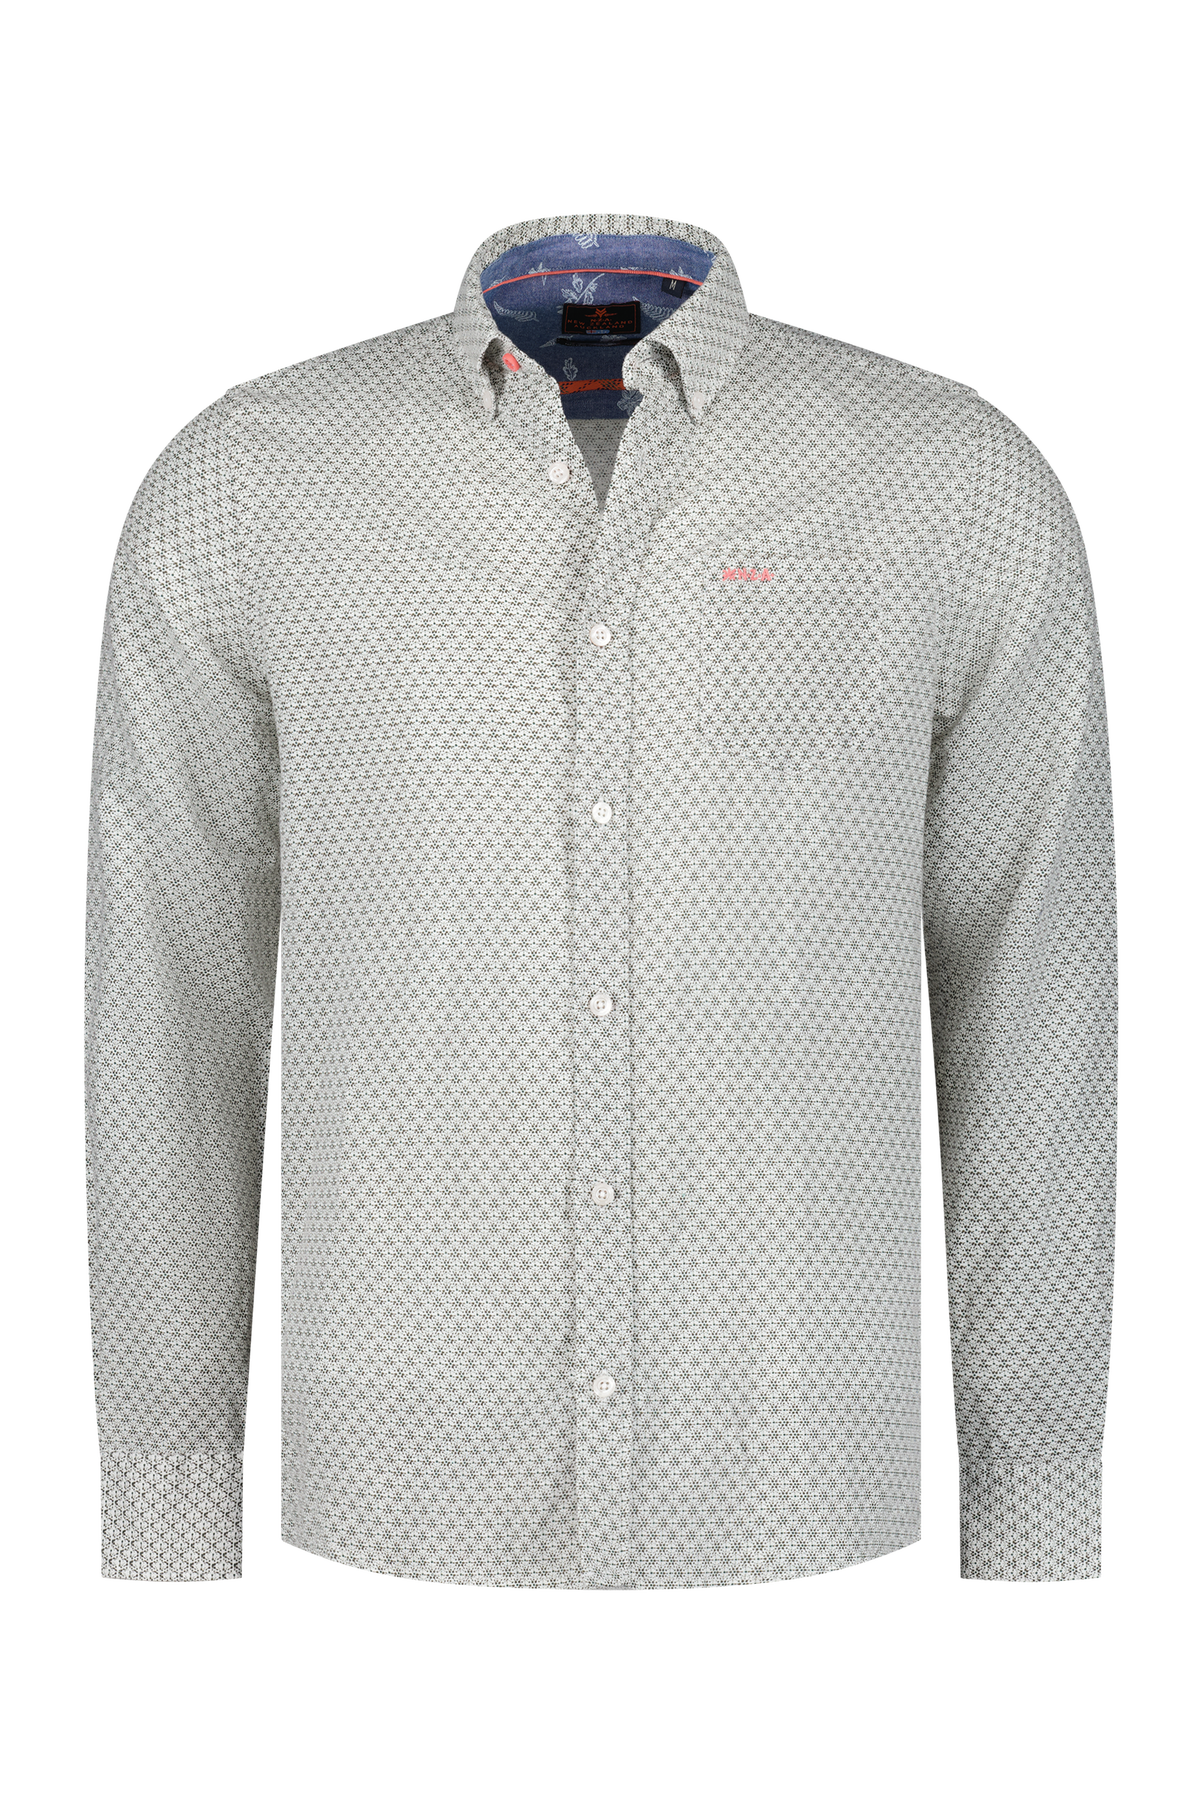 Linen shirt with dotted print - Misty Army